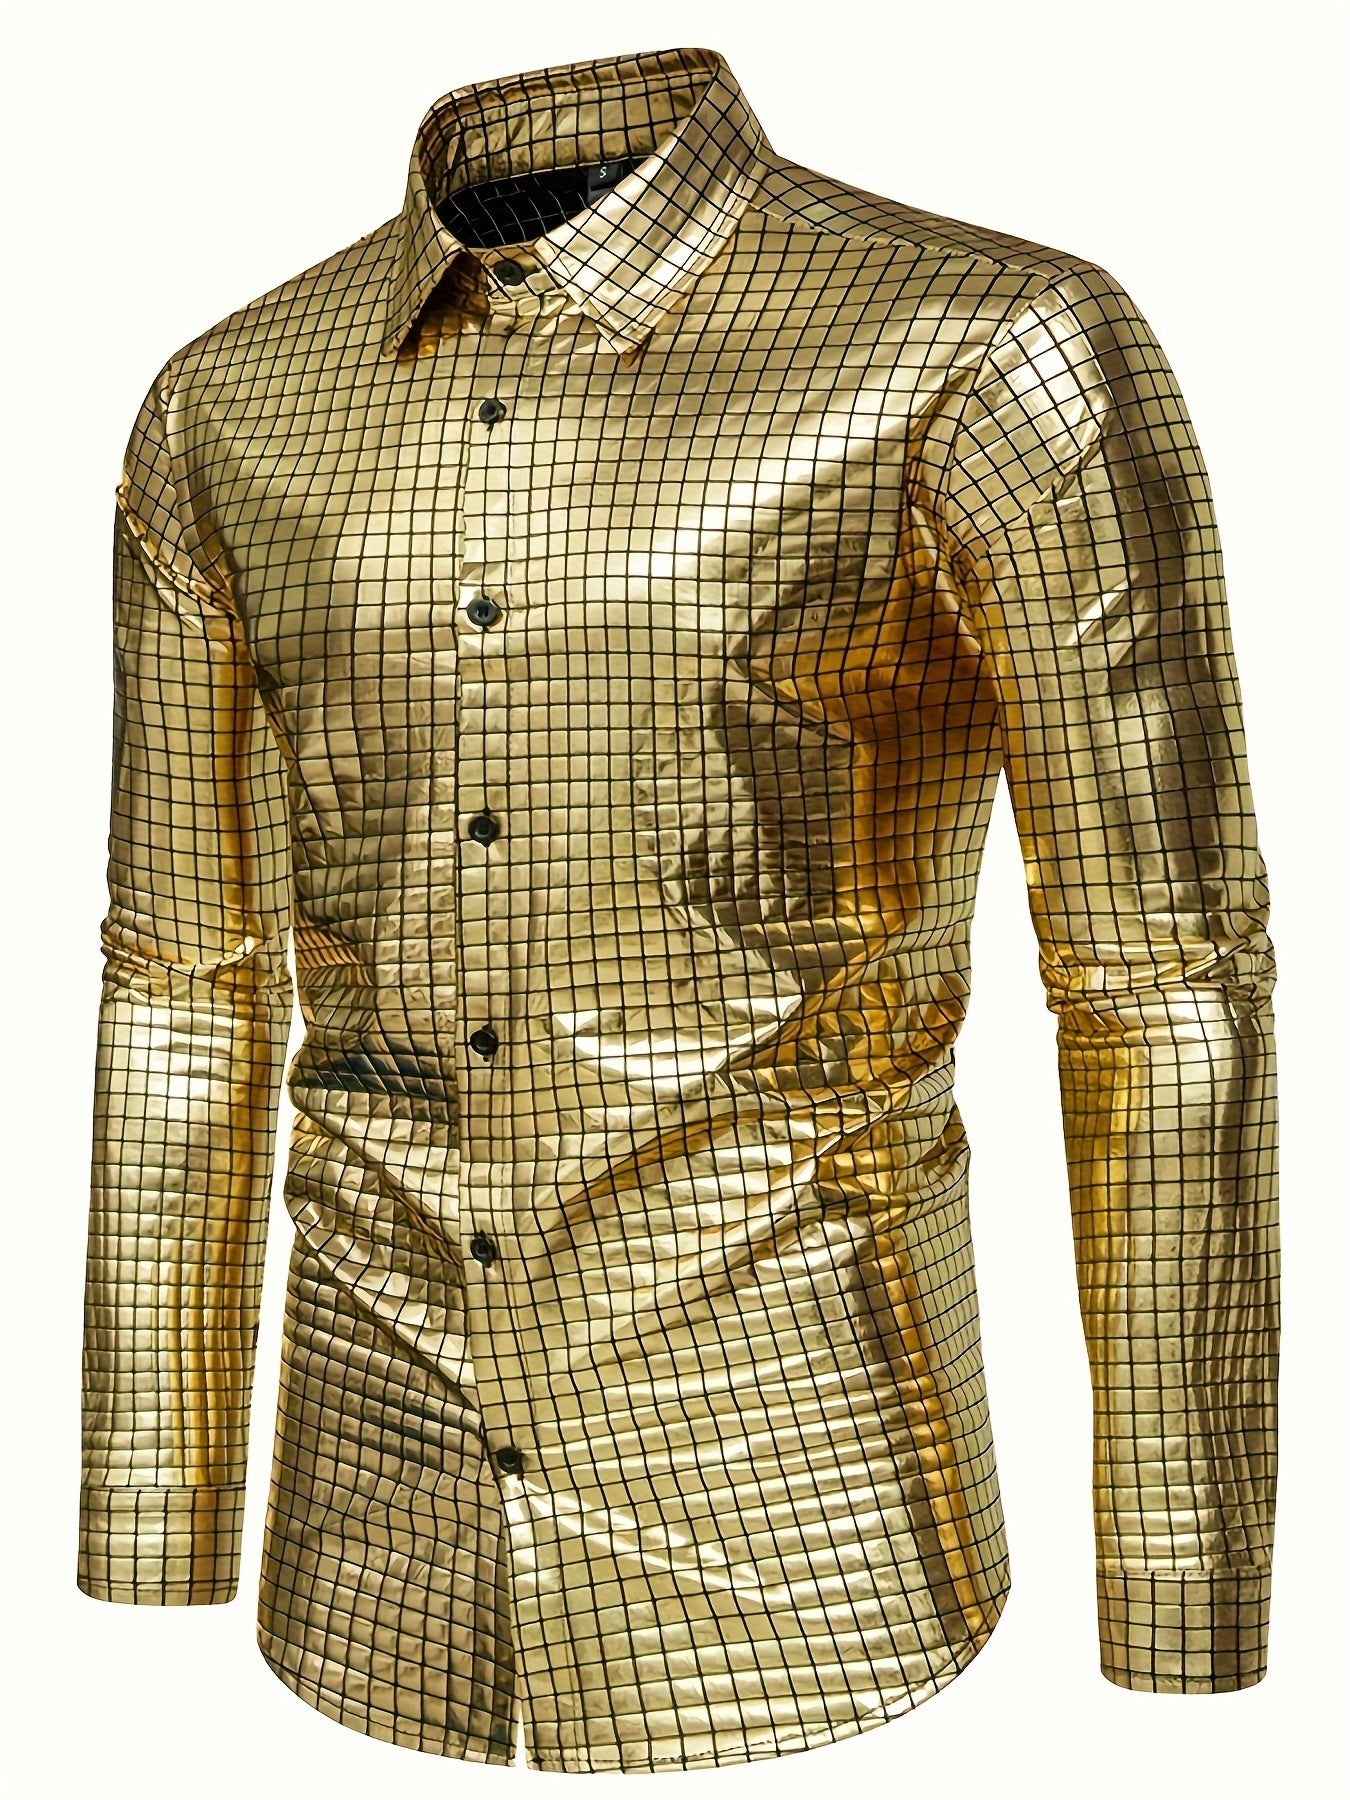 "Men's Sequin Checkered Party Shirt - Long Sleeve Button Up, Spring/Fall Fashion"